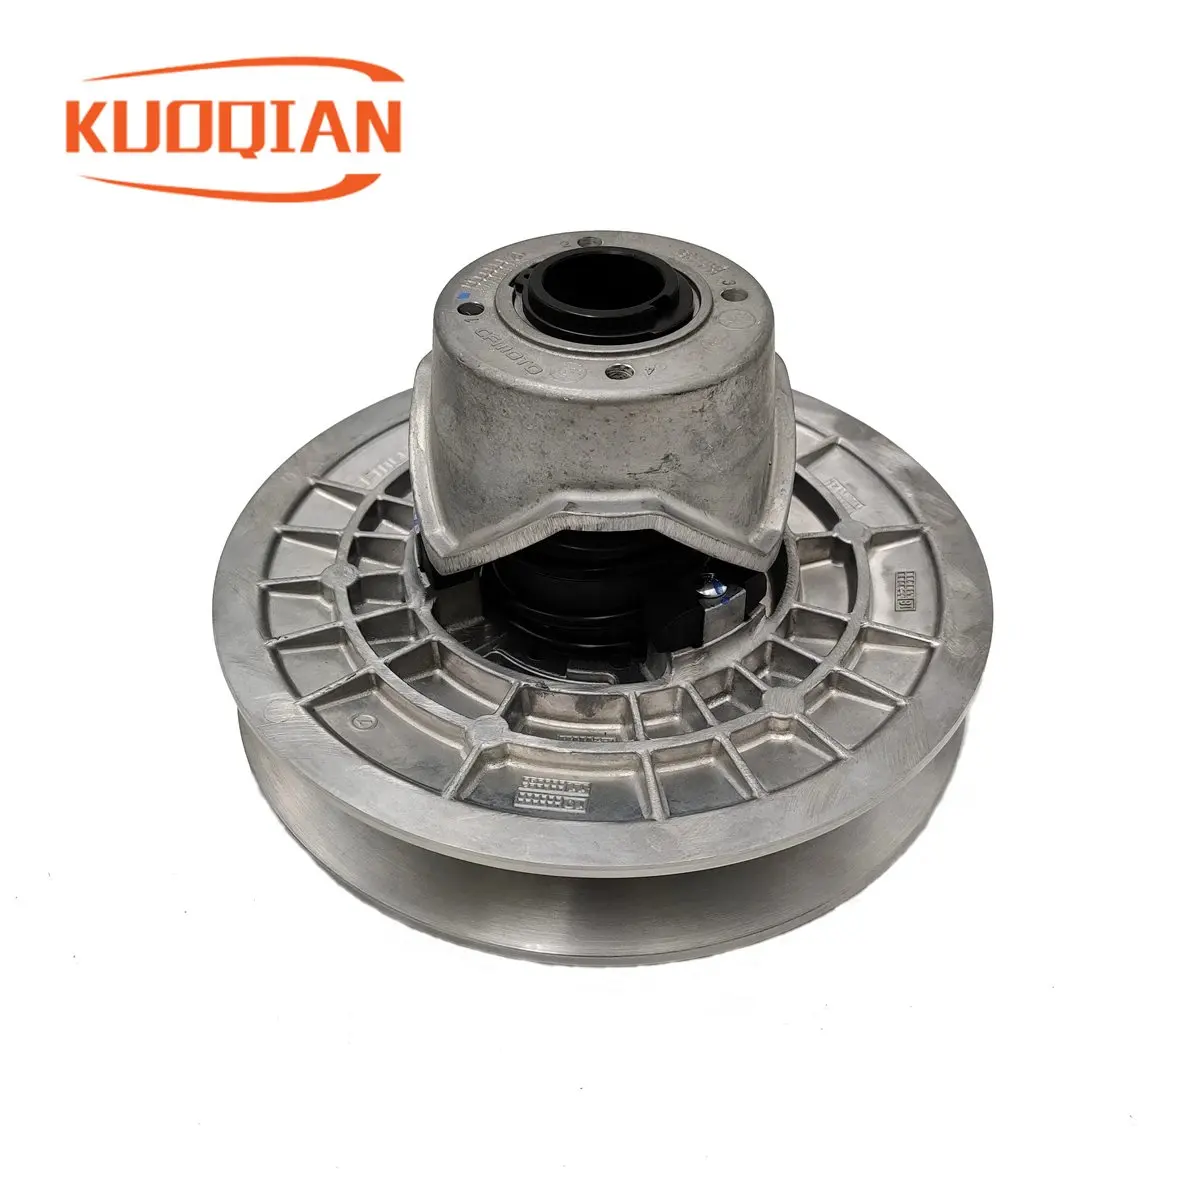 CFMoto 800 Clutch Pulley Assy Secondary Clutch Sheave Driven Pulley for CF800 X8 ATV UTV QUAD 0800-052000-0001